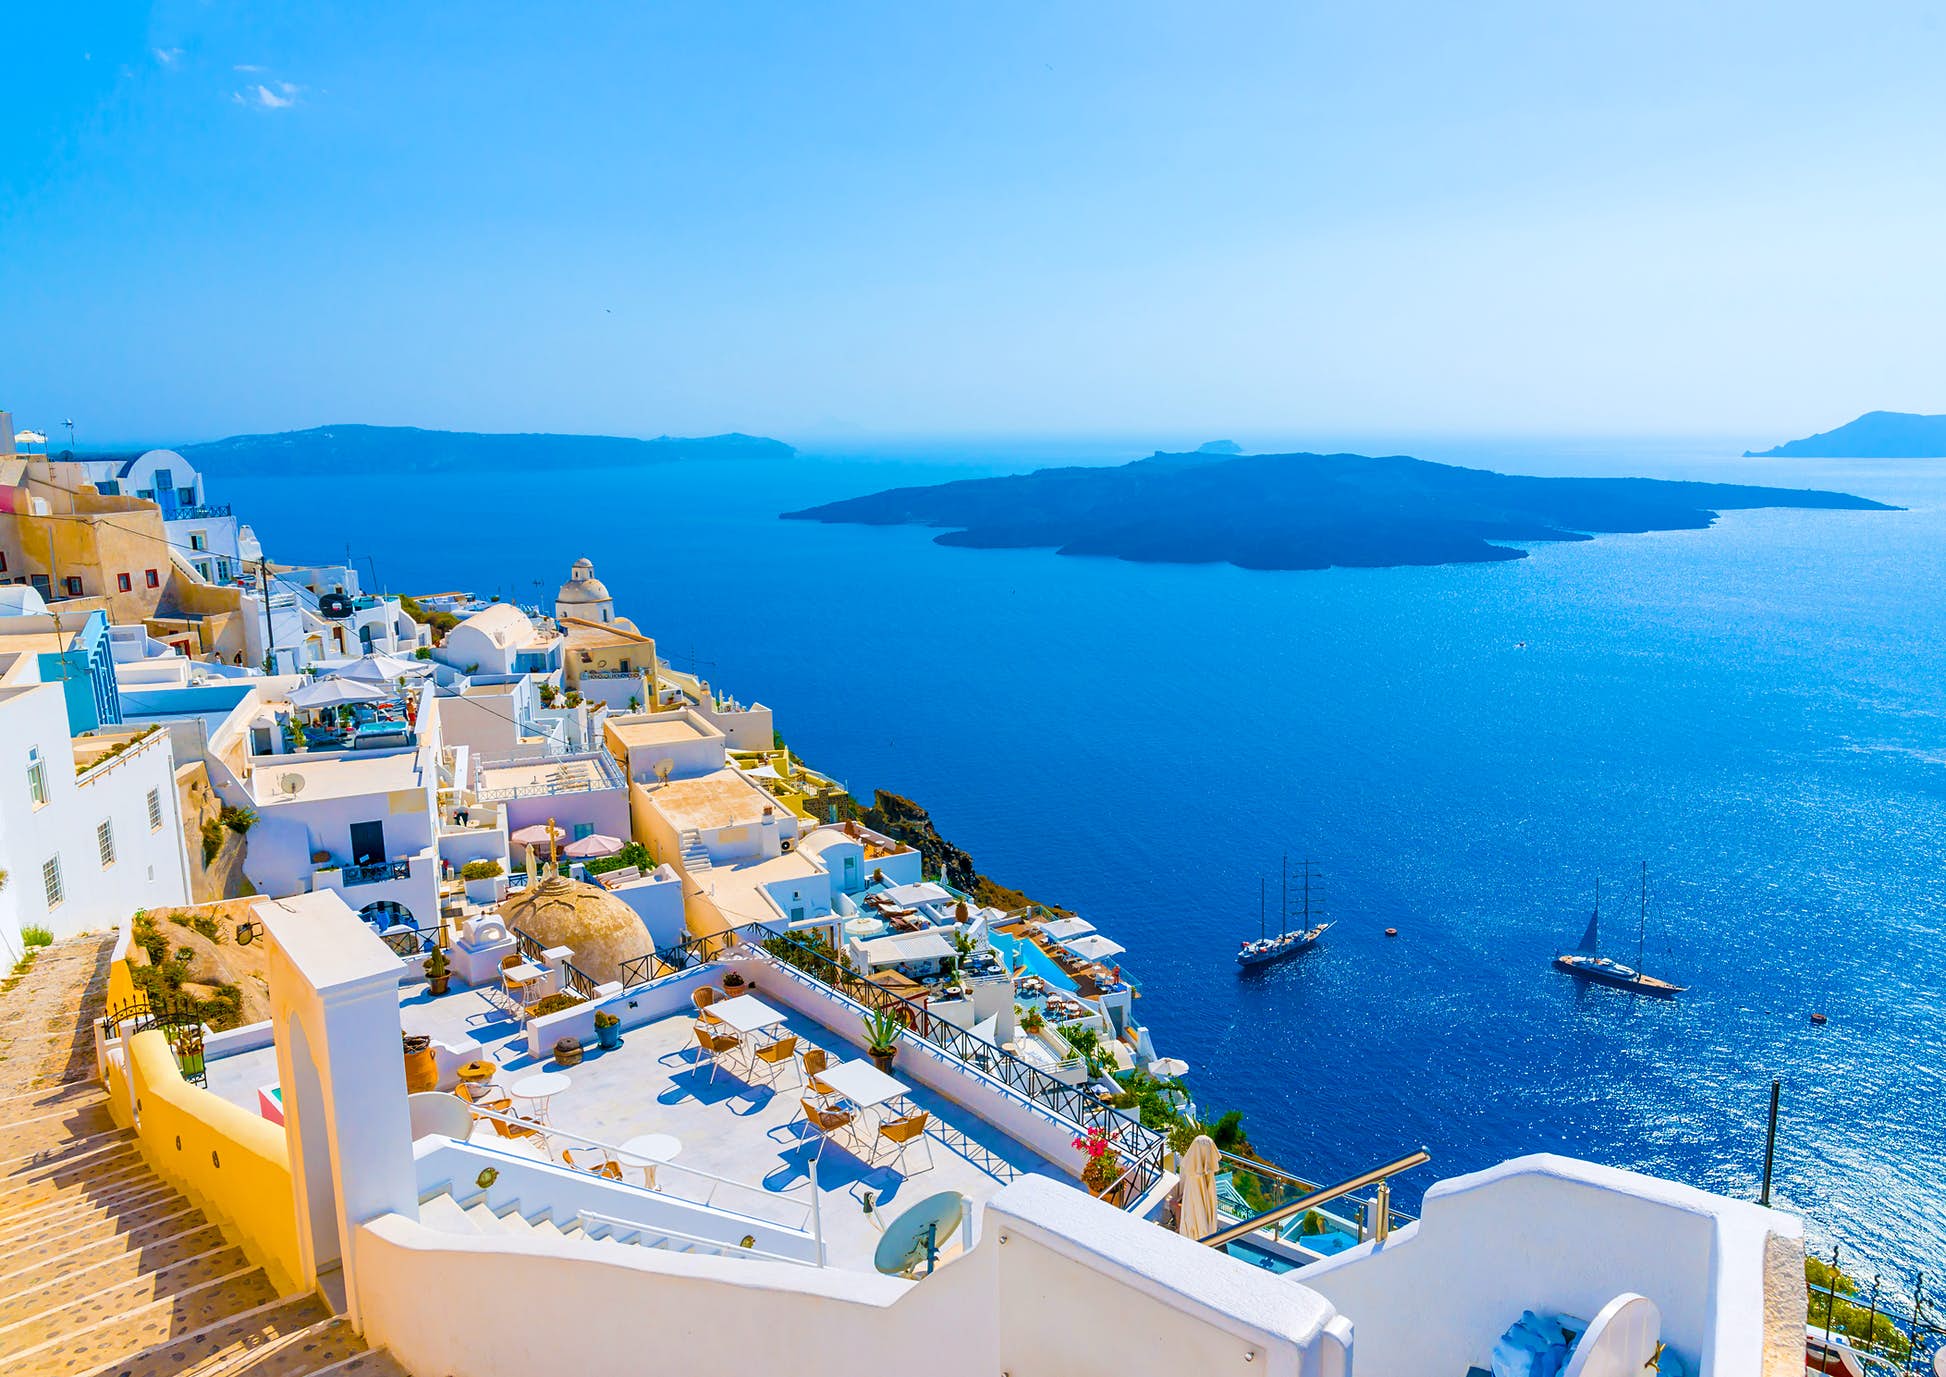 Greece has begun to reopen its hospitality and tourism sectors ©imagIN.gr photography/Shutterstock